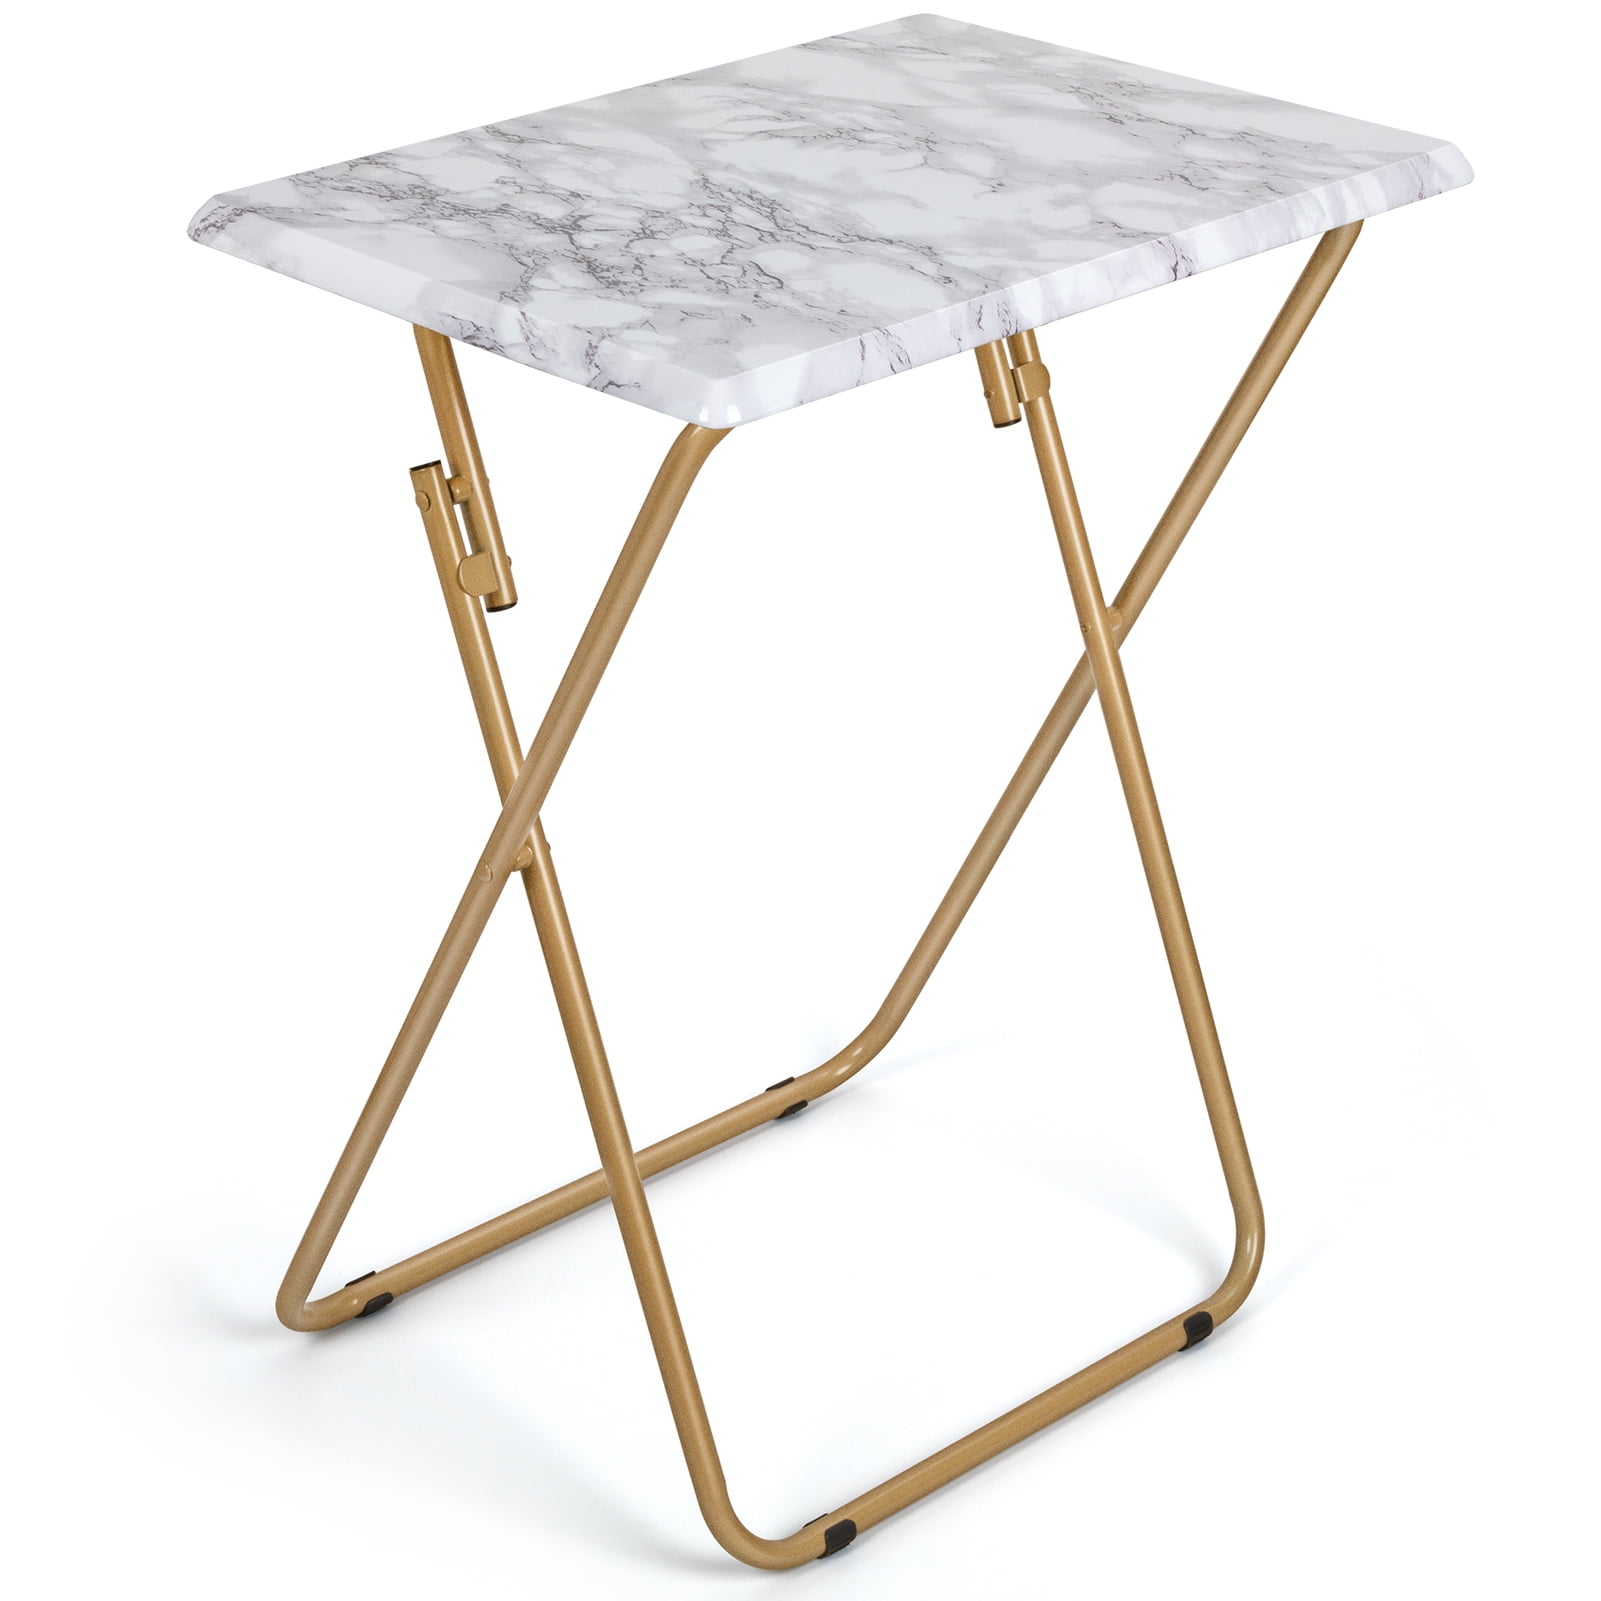 Details about   NEW Tray Table Set Faux Marble White Dinner Snack TV Folding Wood Home Decor 